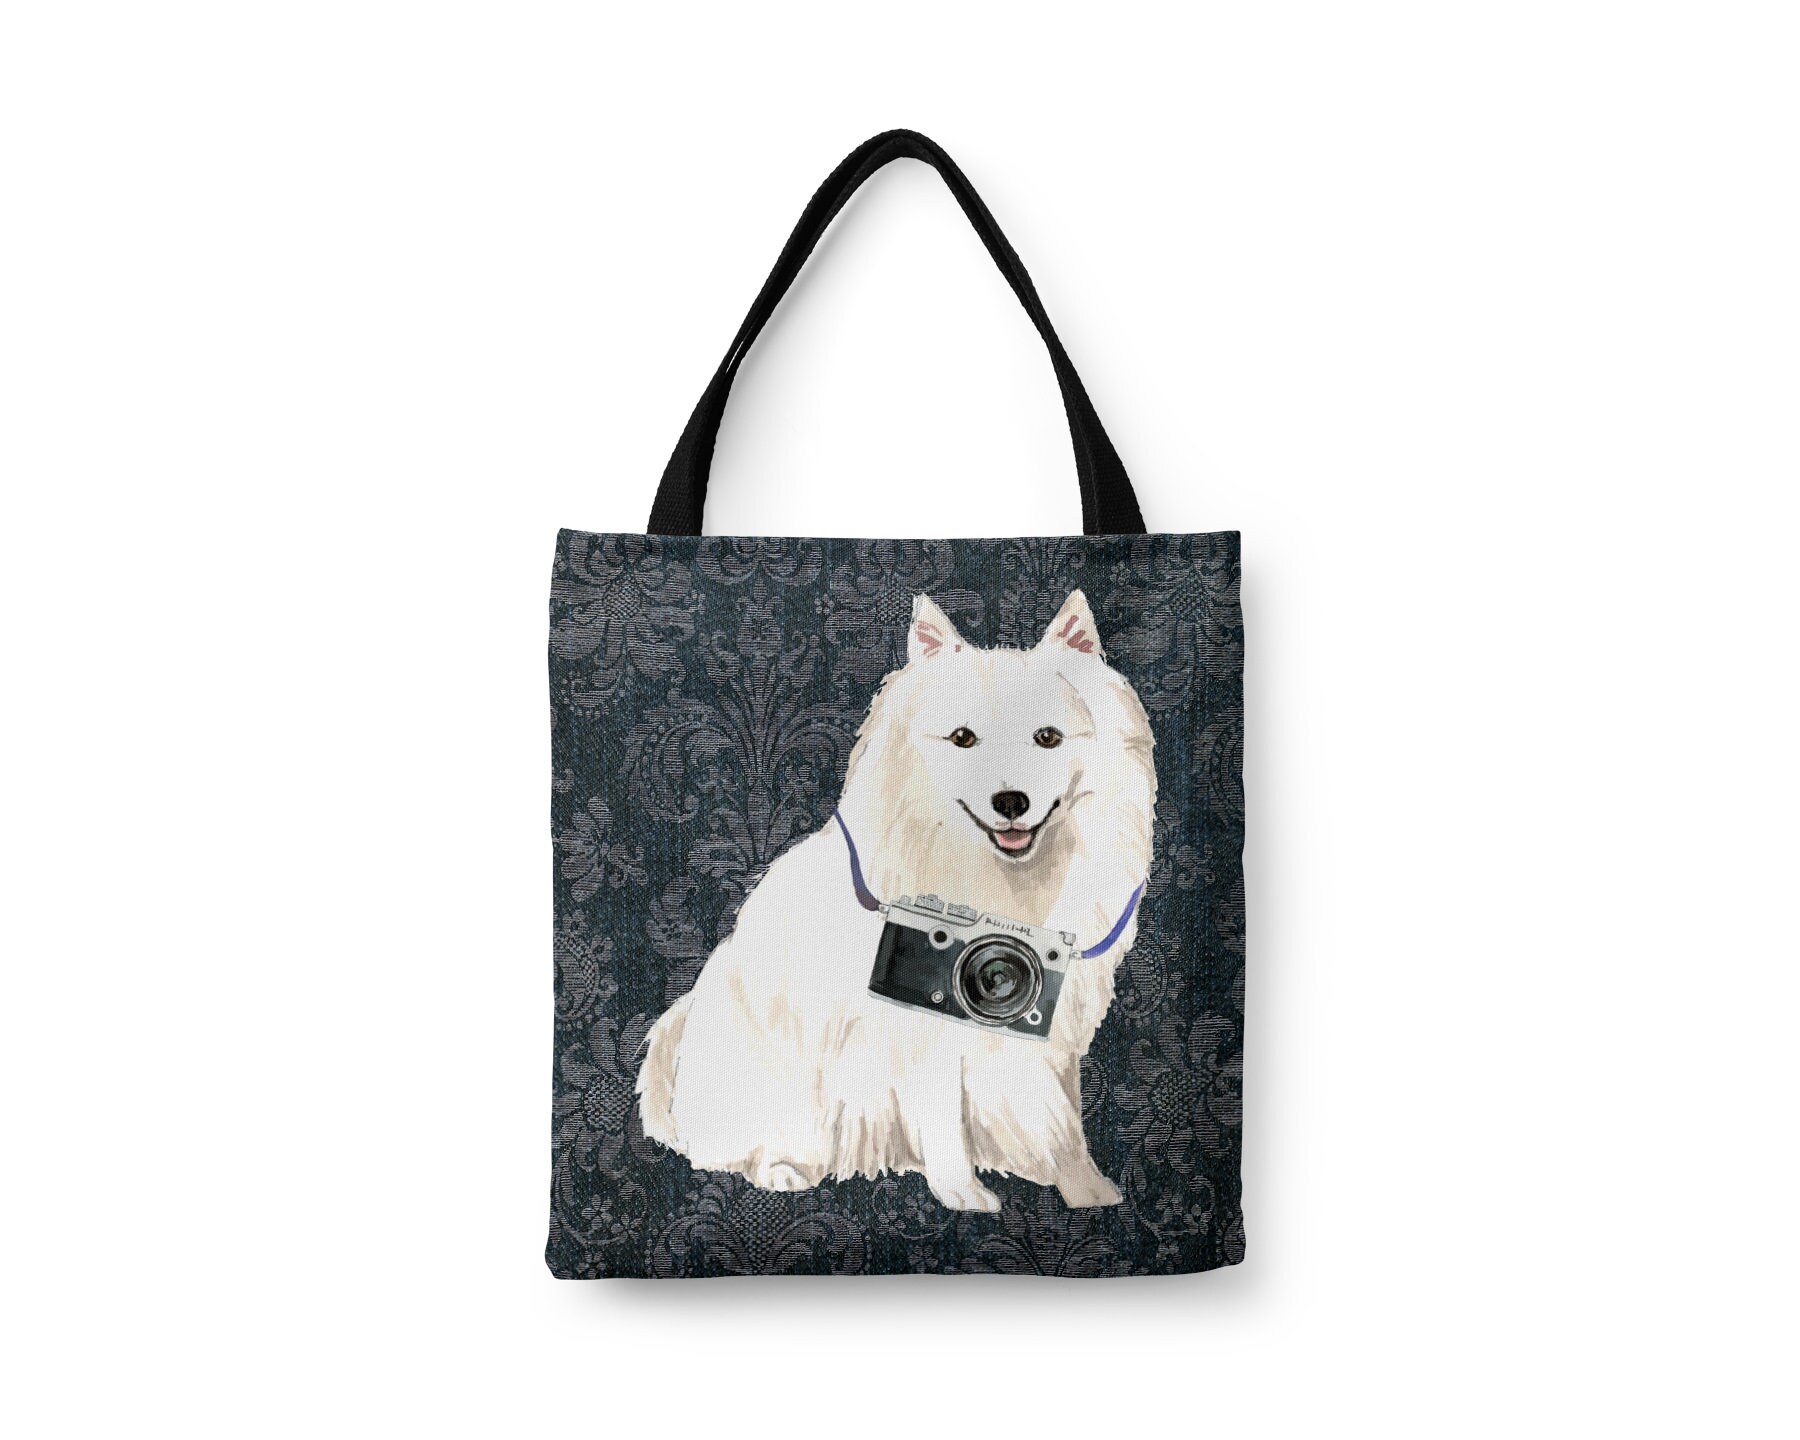 Japanese Spitz Dog Tote Bag Illustrated Dogs & 6 Denim Inspired Styles. All Purpose Ideal For Shopping, Laptop. Js